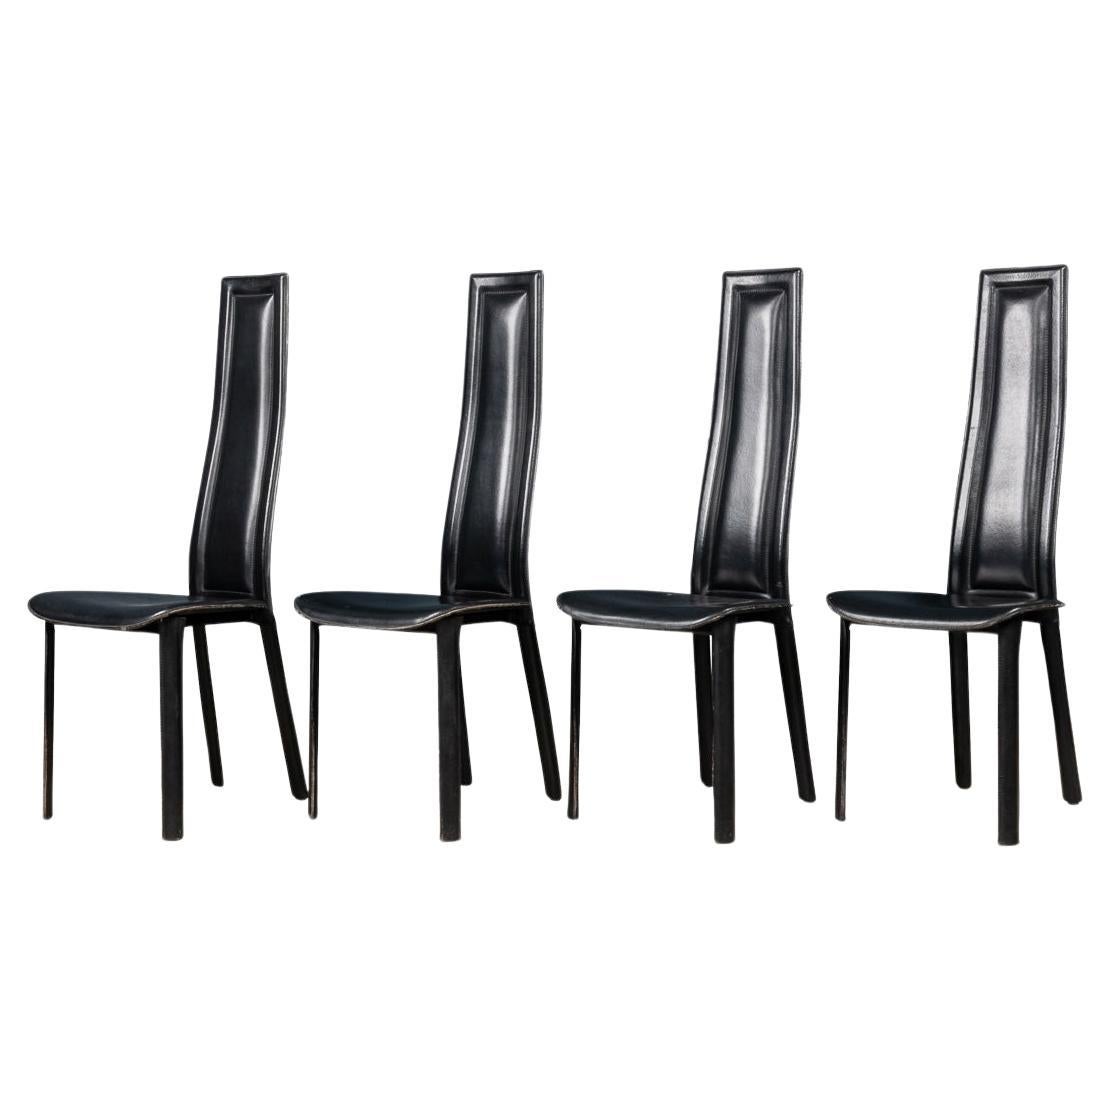 20th Century Italian Set Of Four Dining Chairs By Giorgio Cattelan For Emmepi